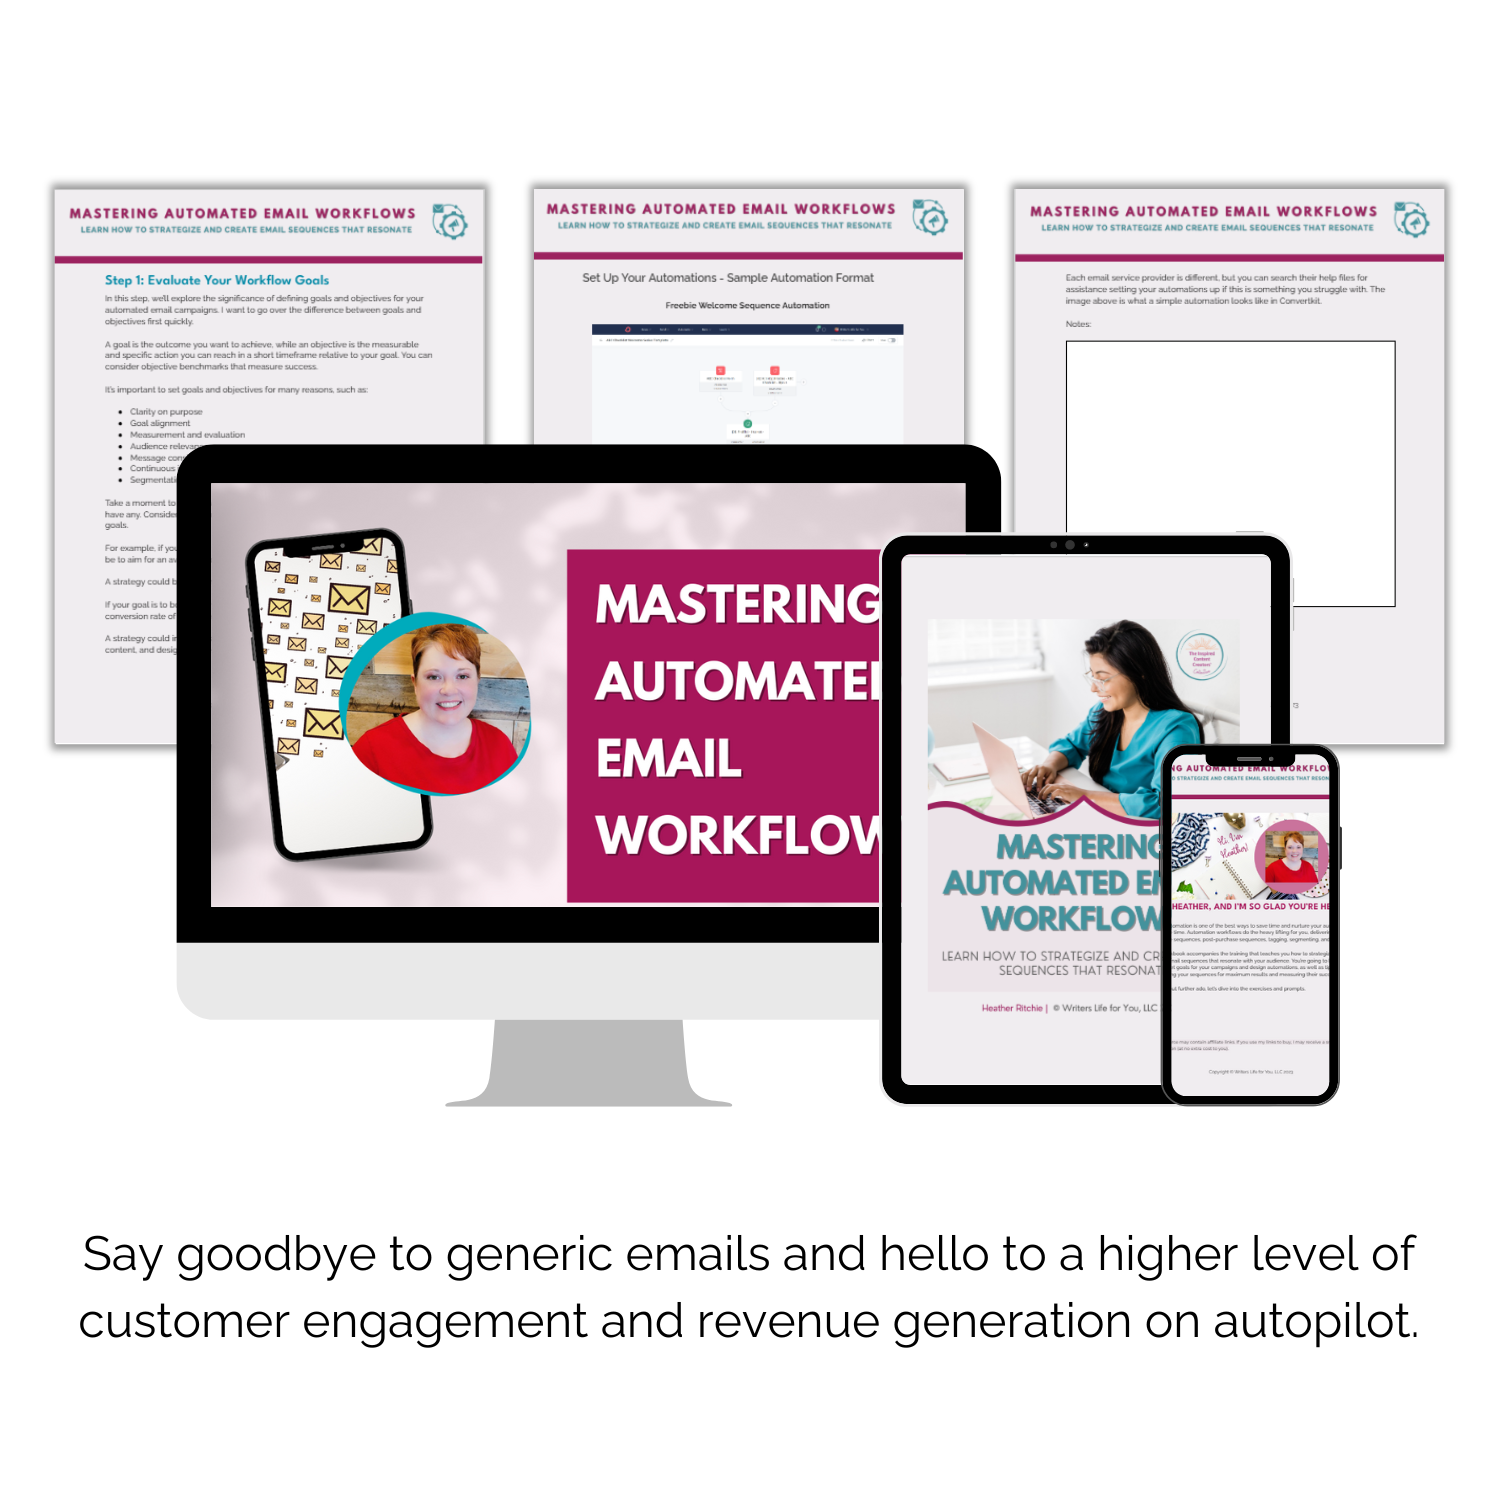 Mastering Automate Email Workflows:  Say goodbye to generic emails and hello to better email engagement on autopilot